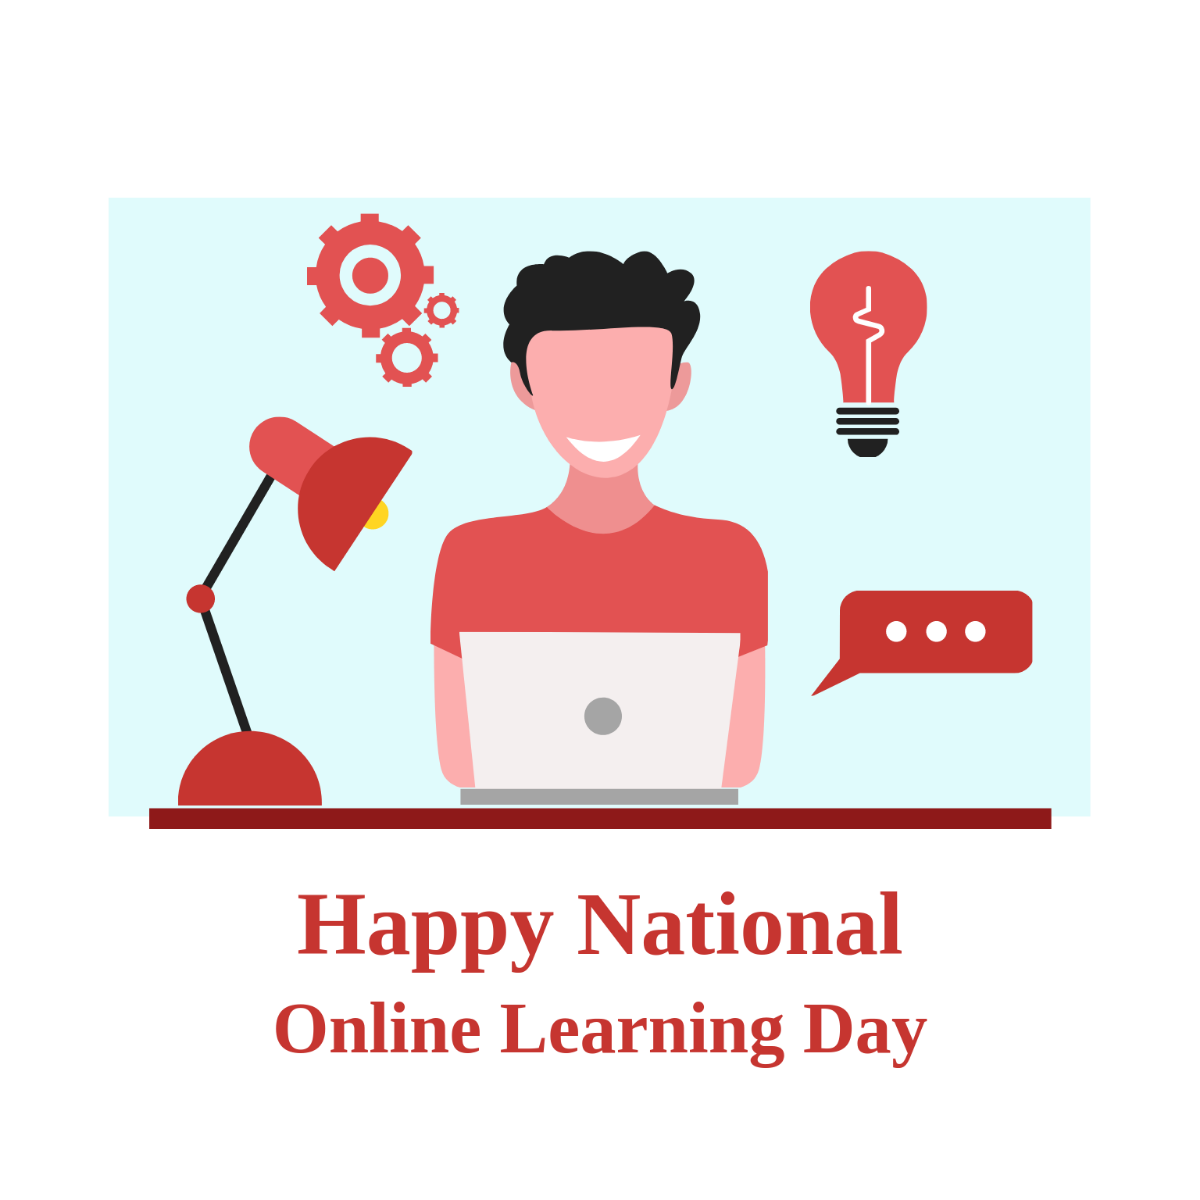 Free Happy National Online Learning Day Vector Template